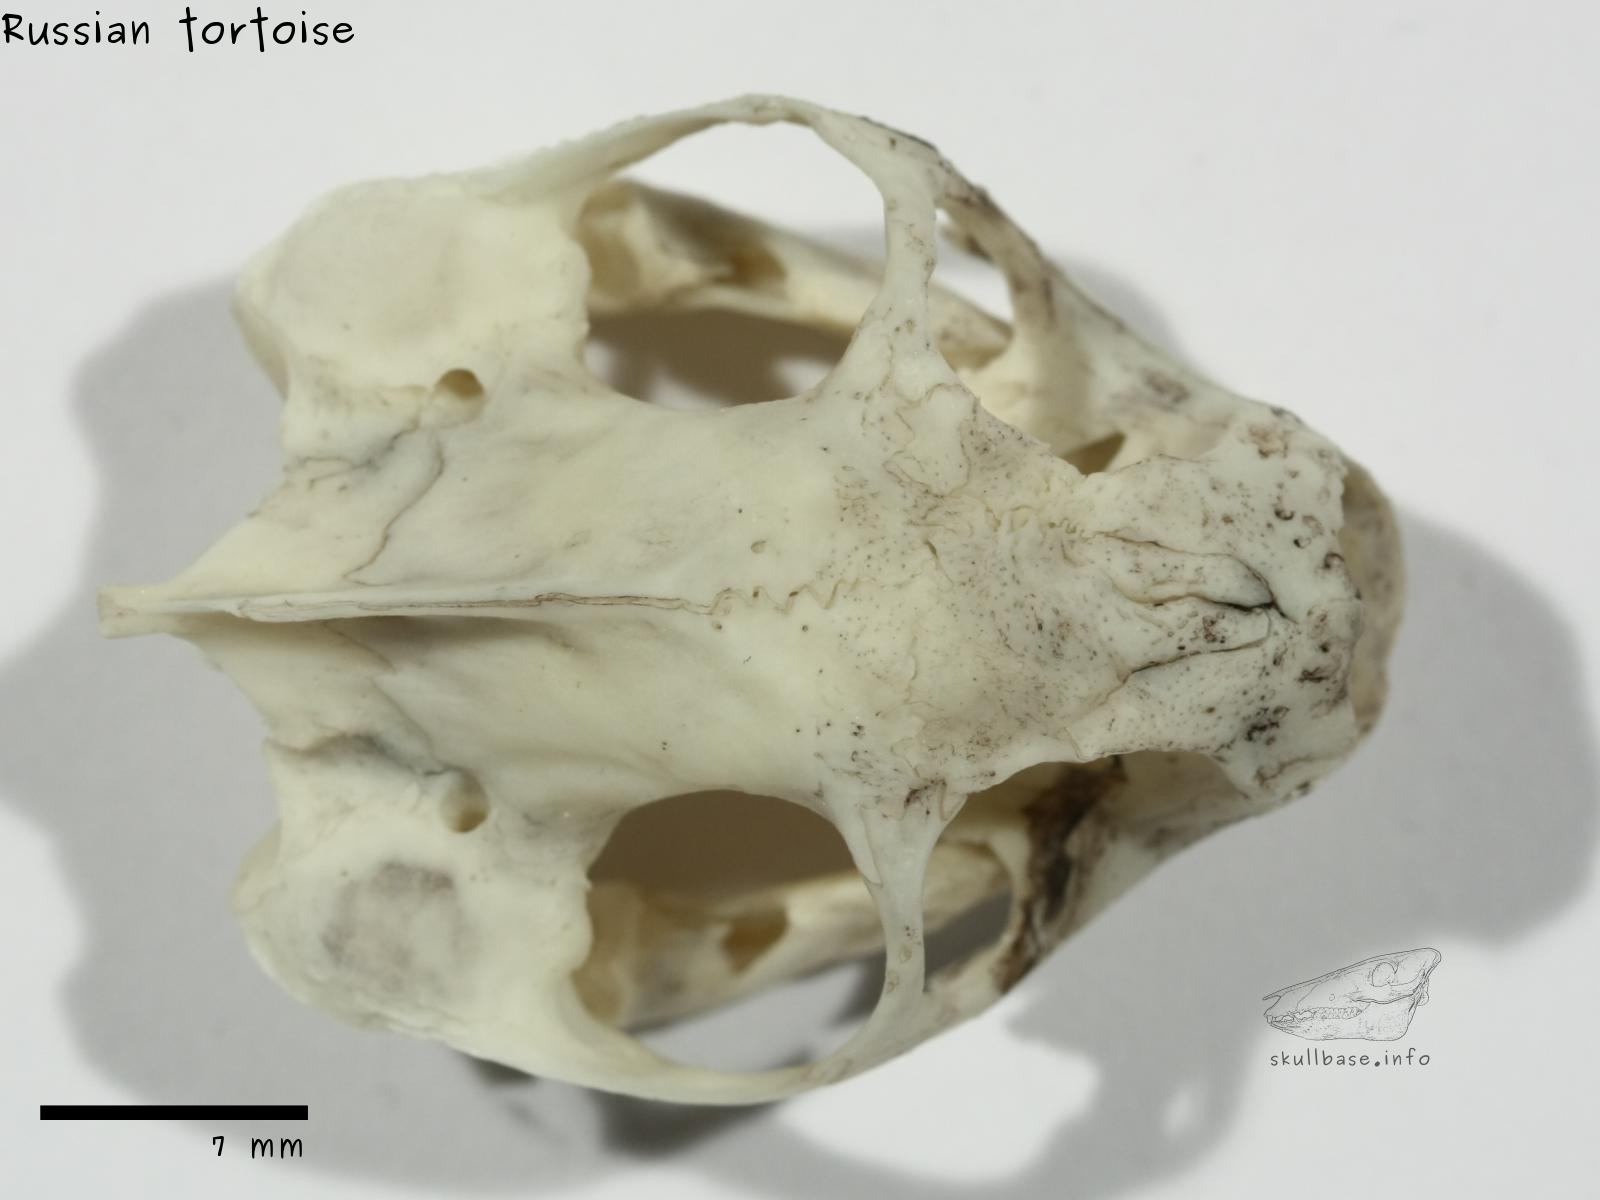 Russian tortoise (Agrionemys horsfieldii) skull dorsal view